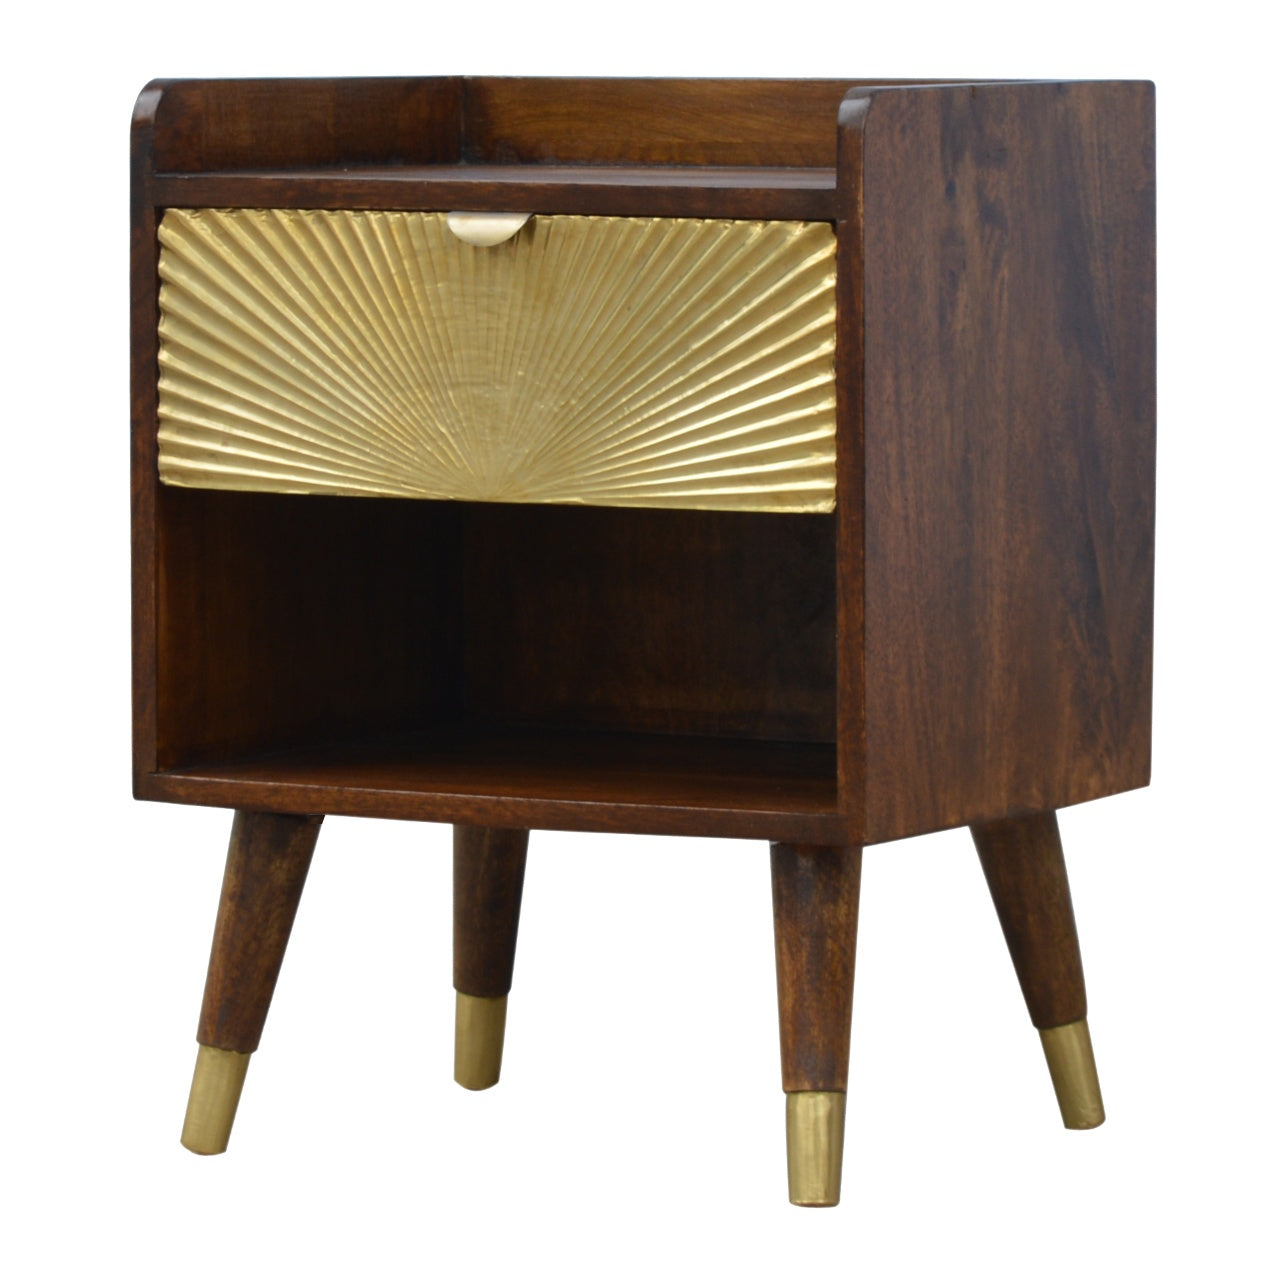 Satura Bedside Table, Solid Chestnut & Gold Brass Inlay - Broxle